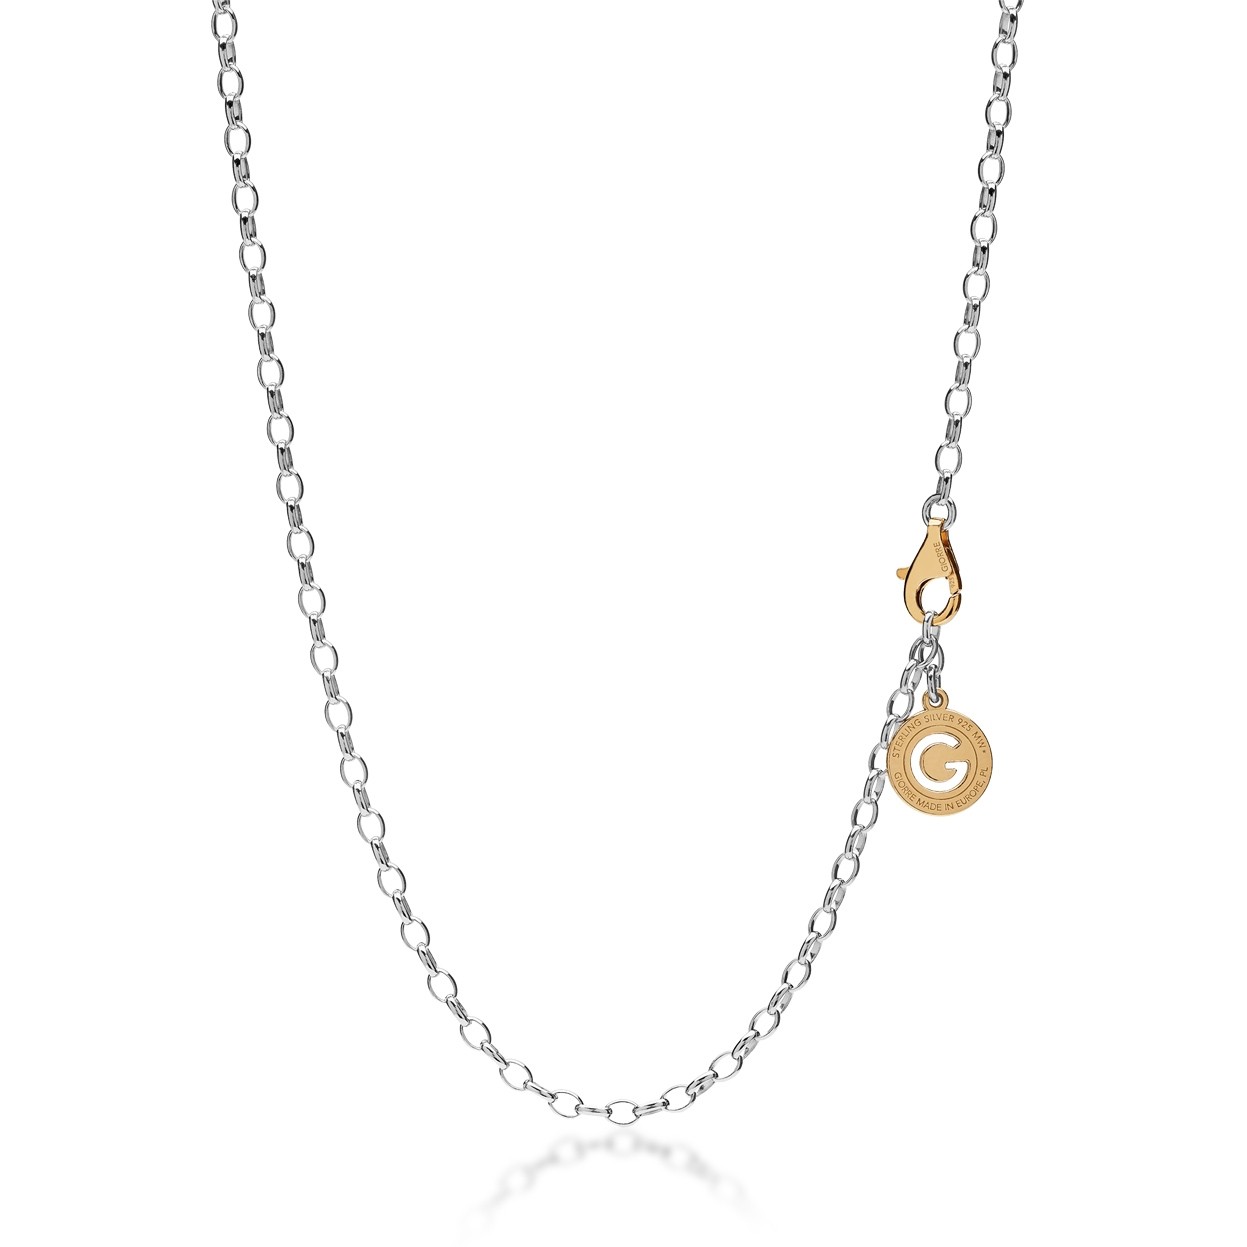 Sterling silver necklace 55-65 cm, yellow gold clasp, link 4x9 mm